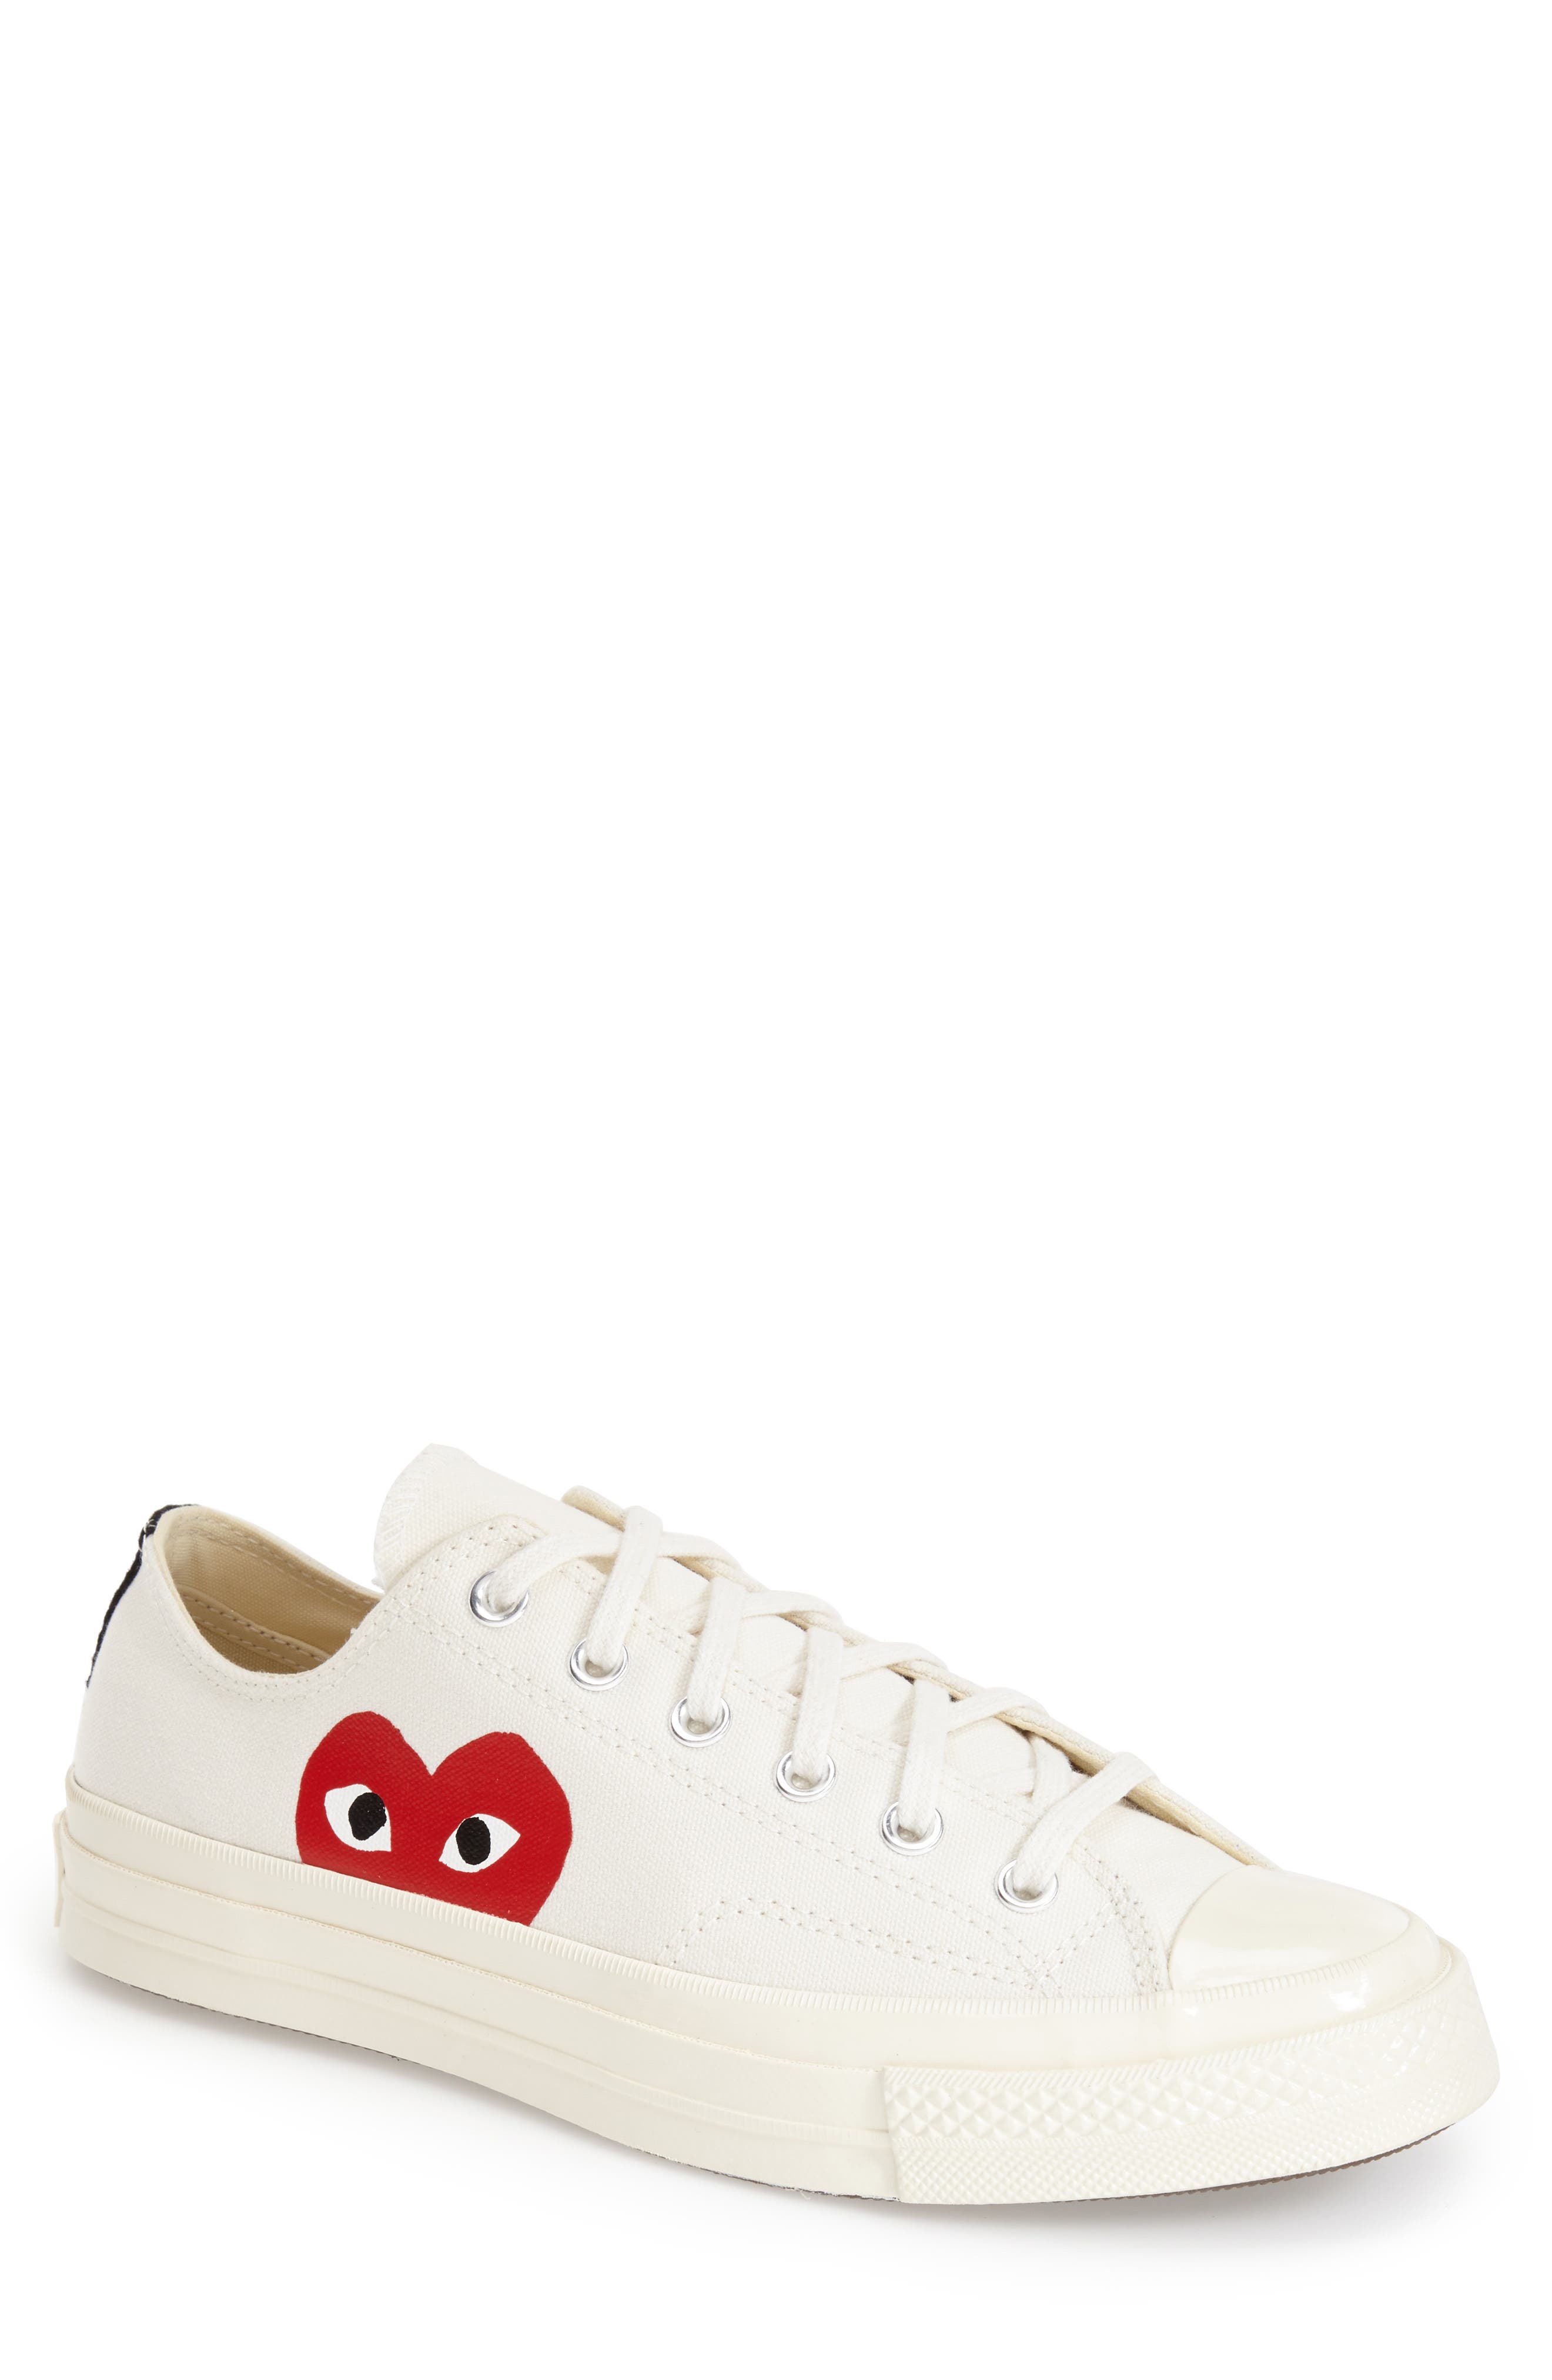 converse shoes nordstrom